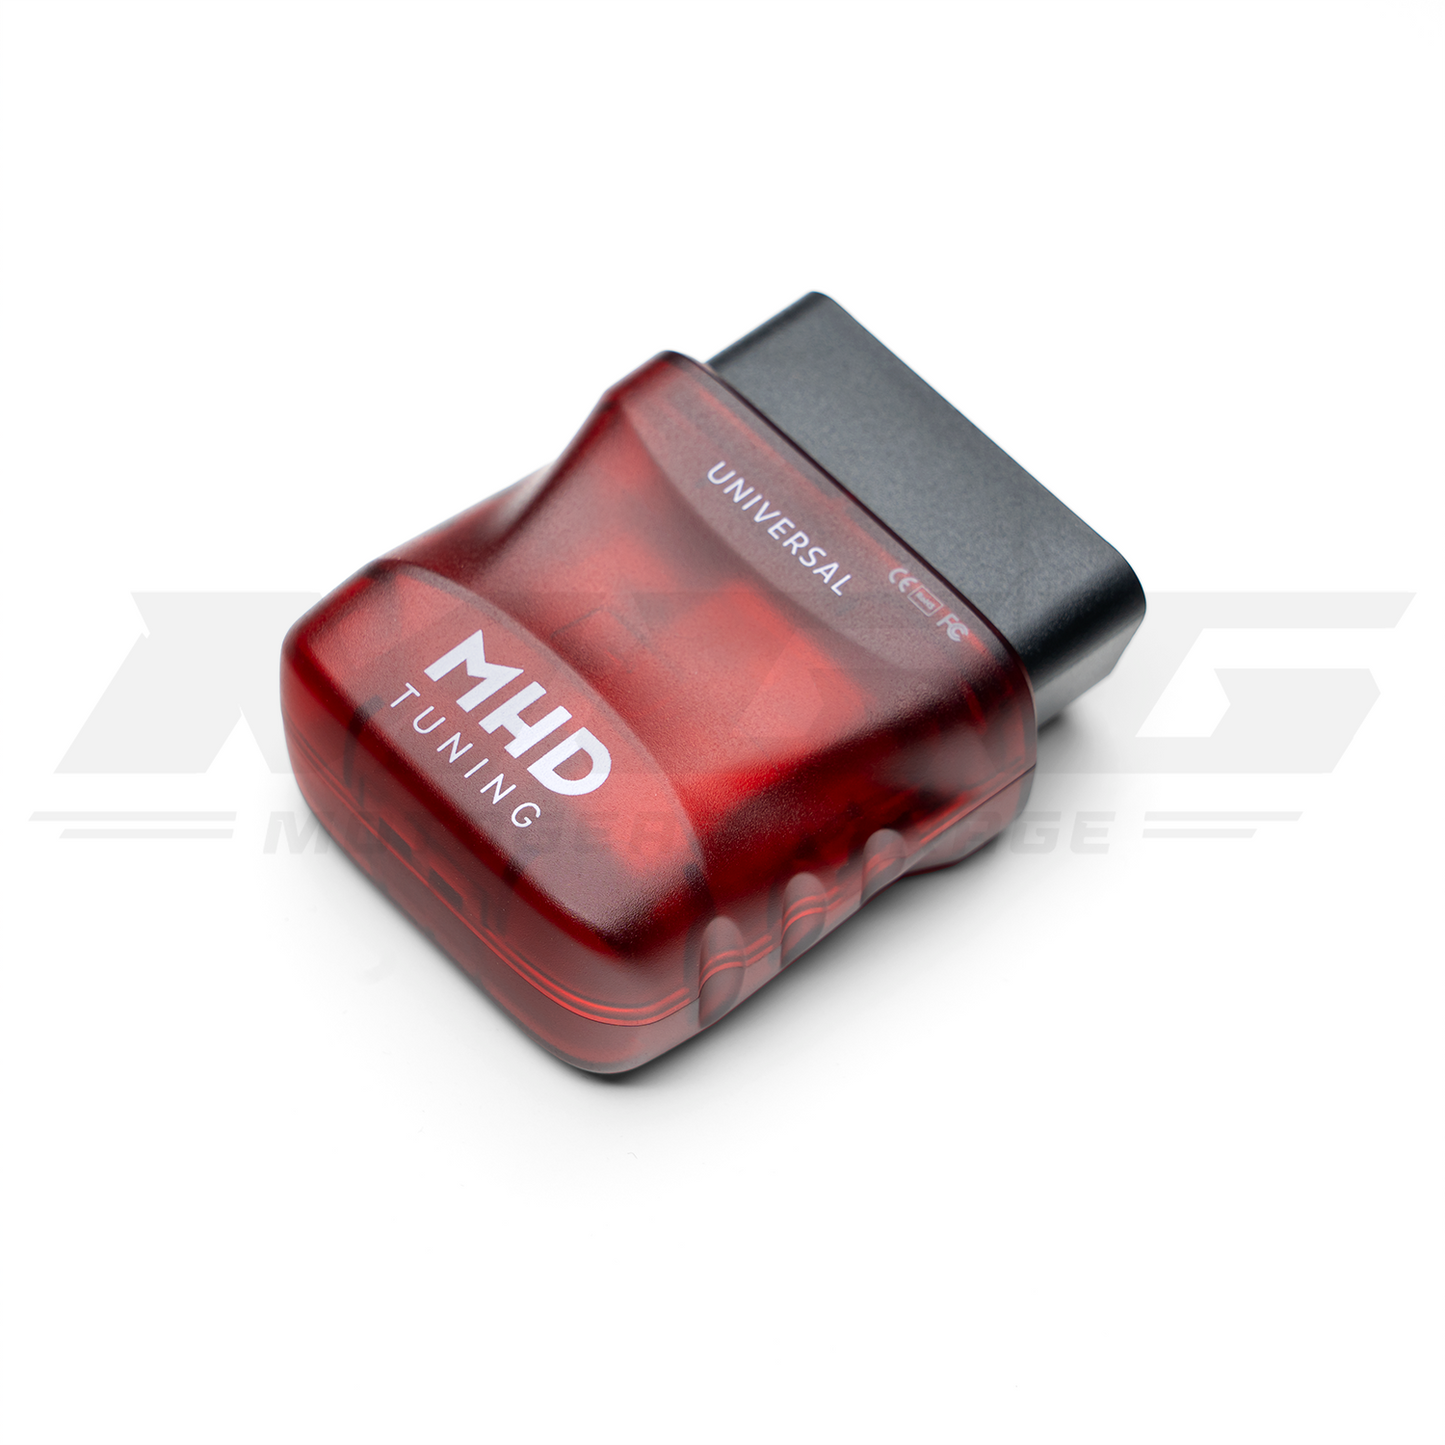 MHD Tuning Wireless WiFi Adapter for BMW E, F, G Chassis, and Toyota Supra.